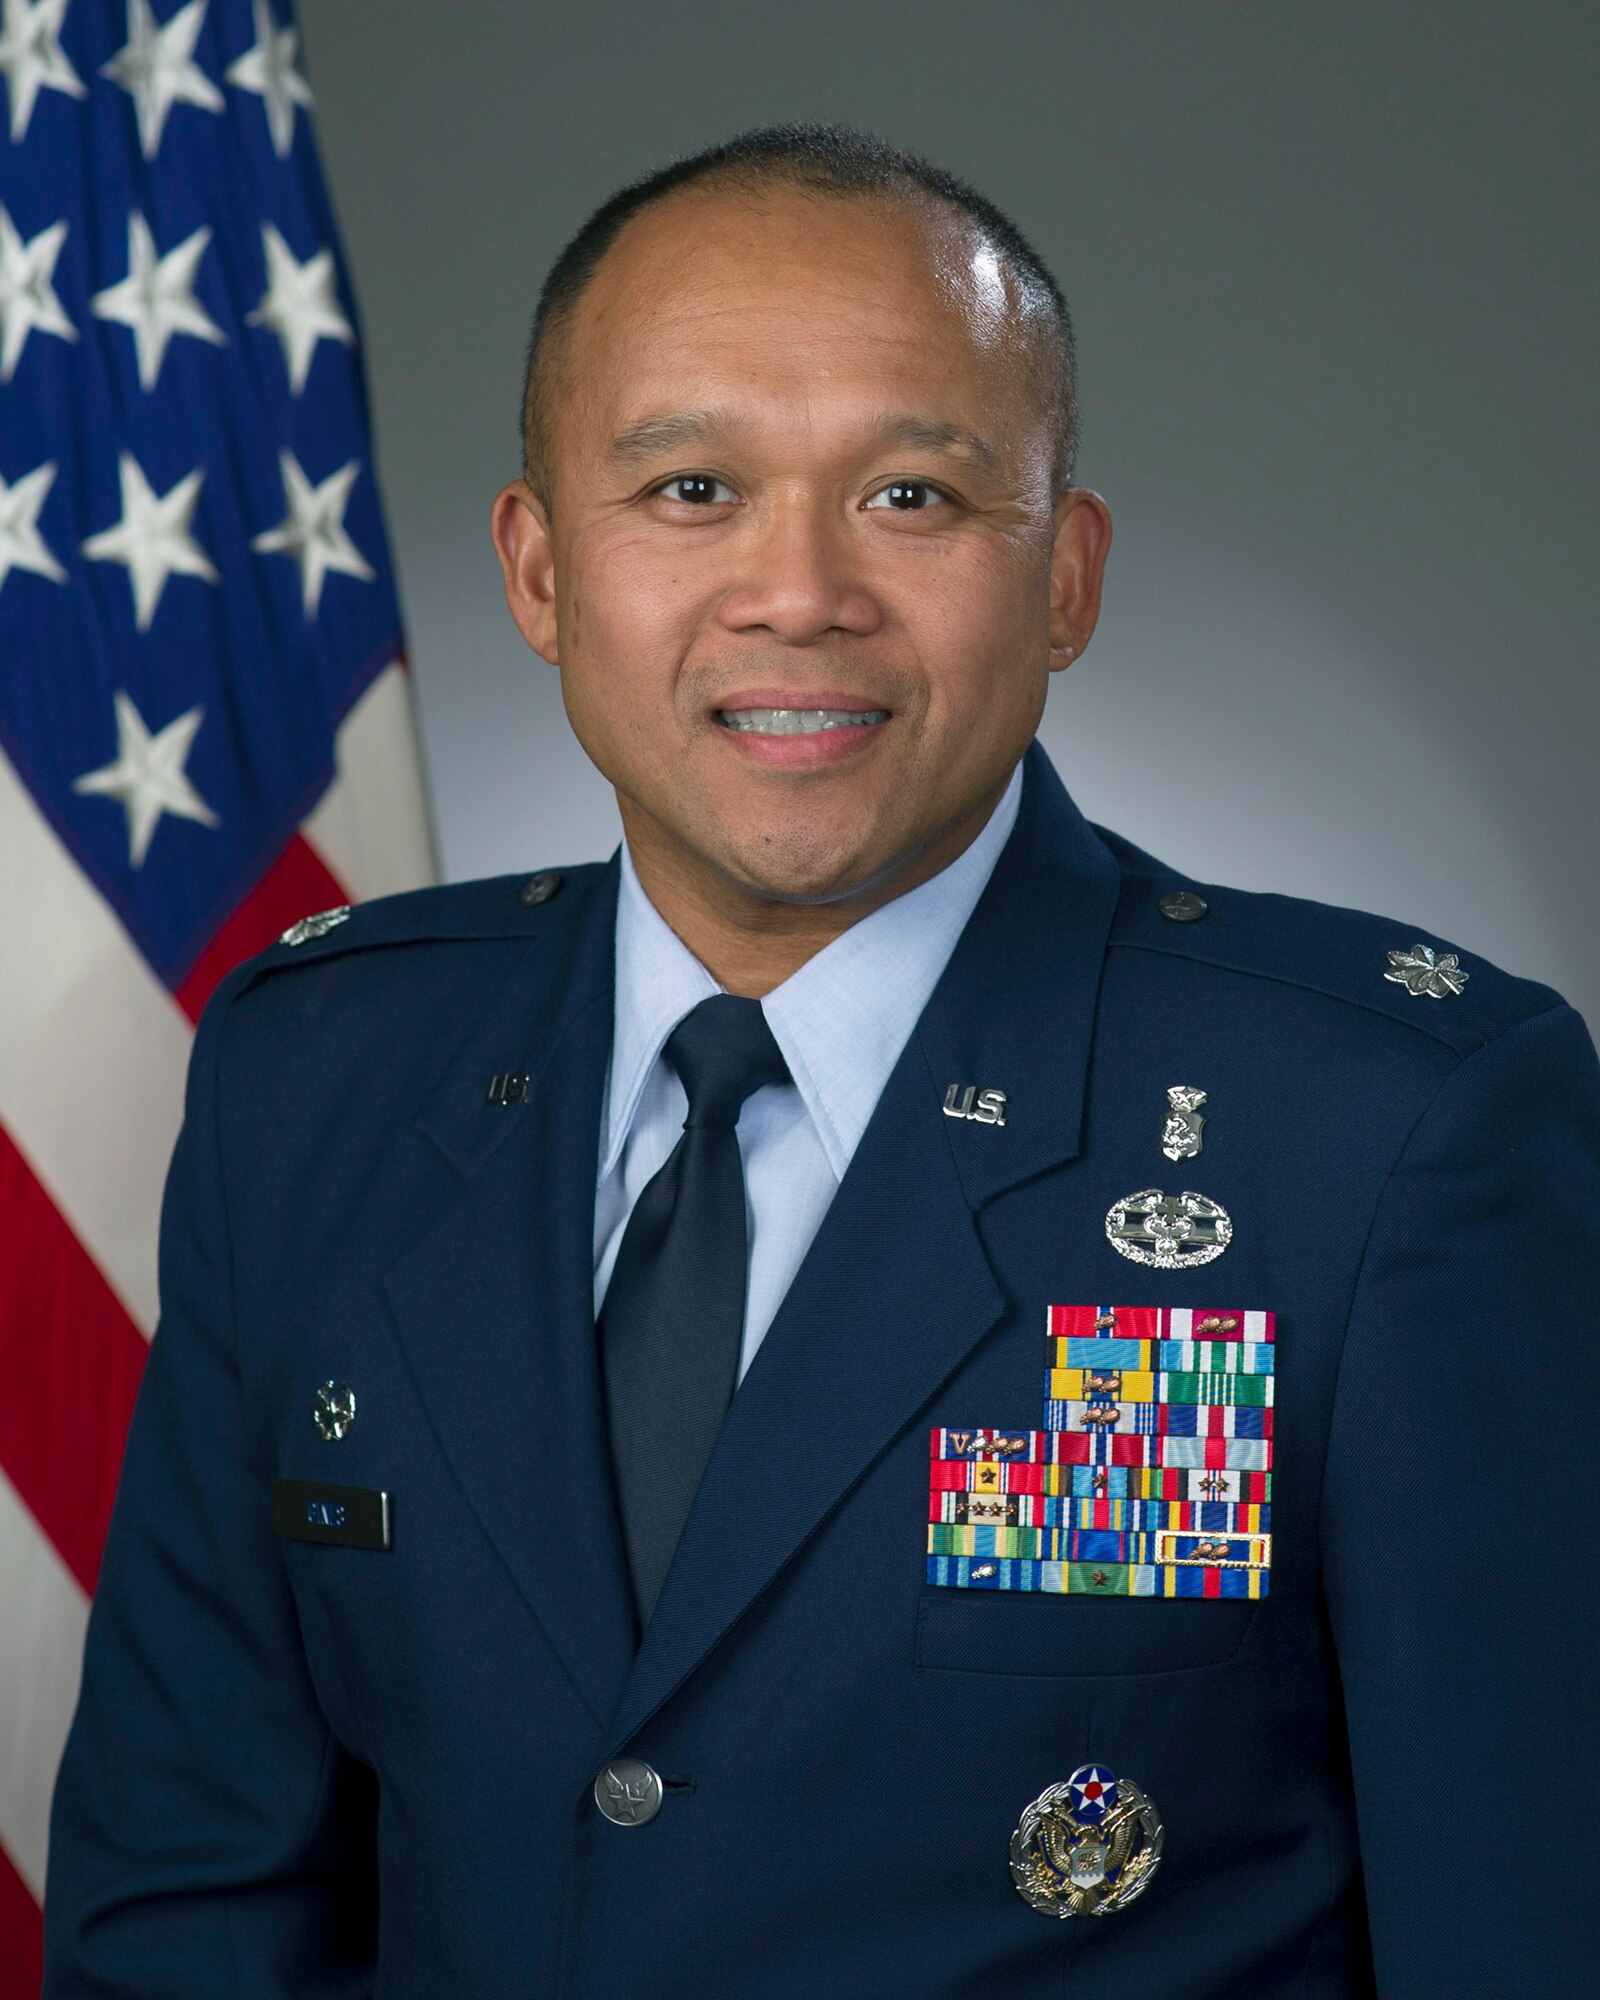 Commentary by Lt. Col. Erwin Gines, 60th Inpatient Squadron commander